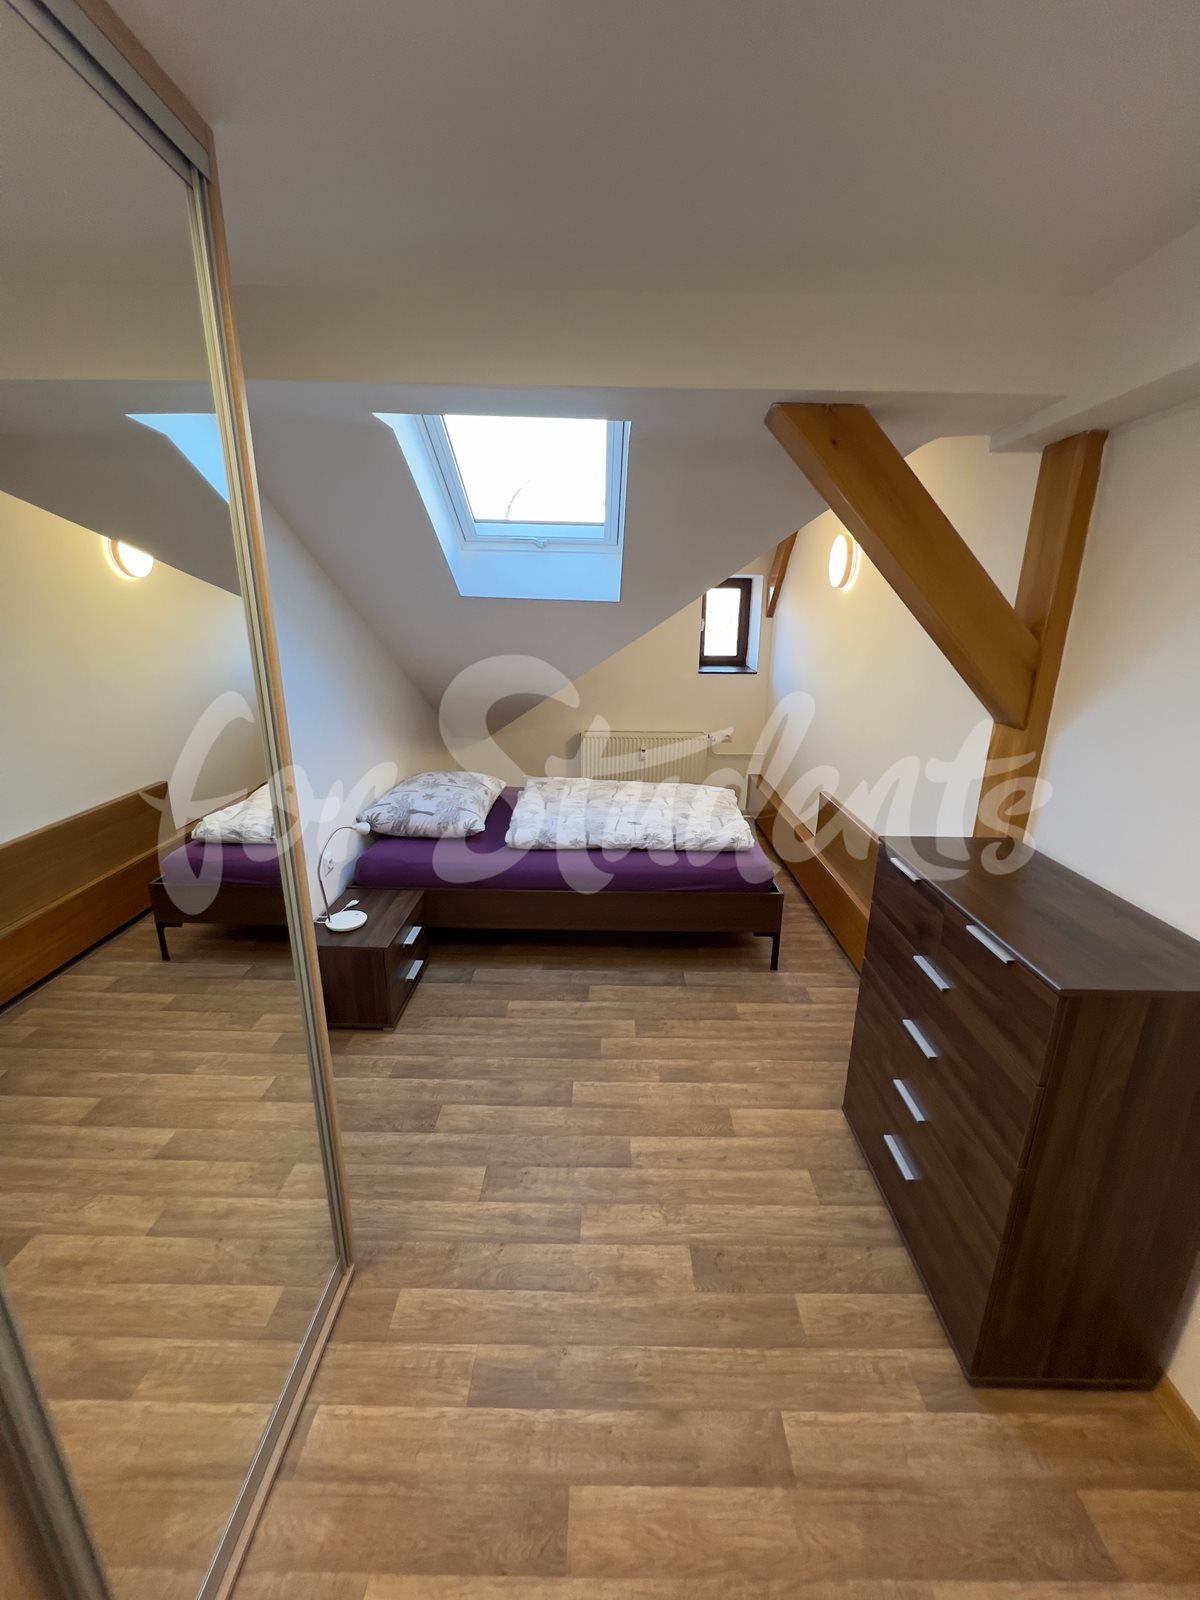 Newly reconstructed one bedroom apartment in the city center, Hradec Králové 